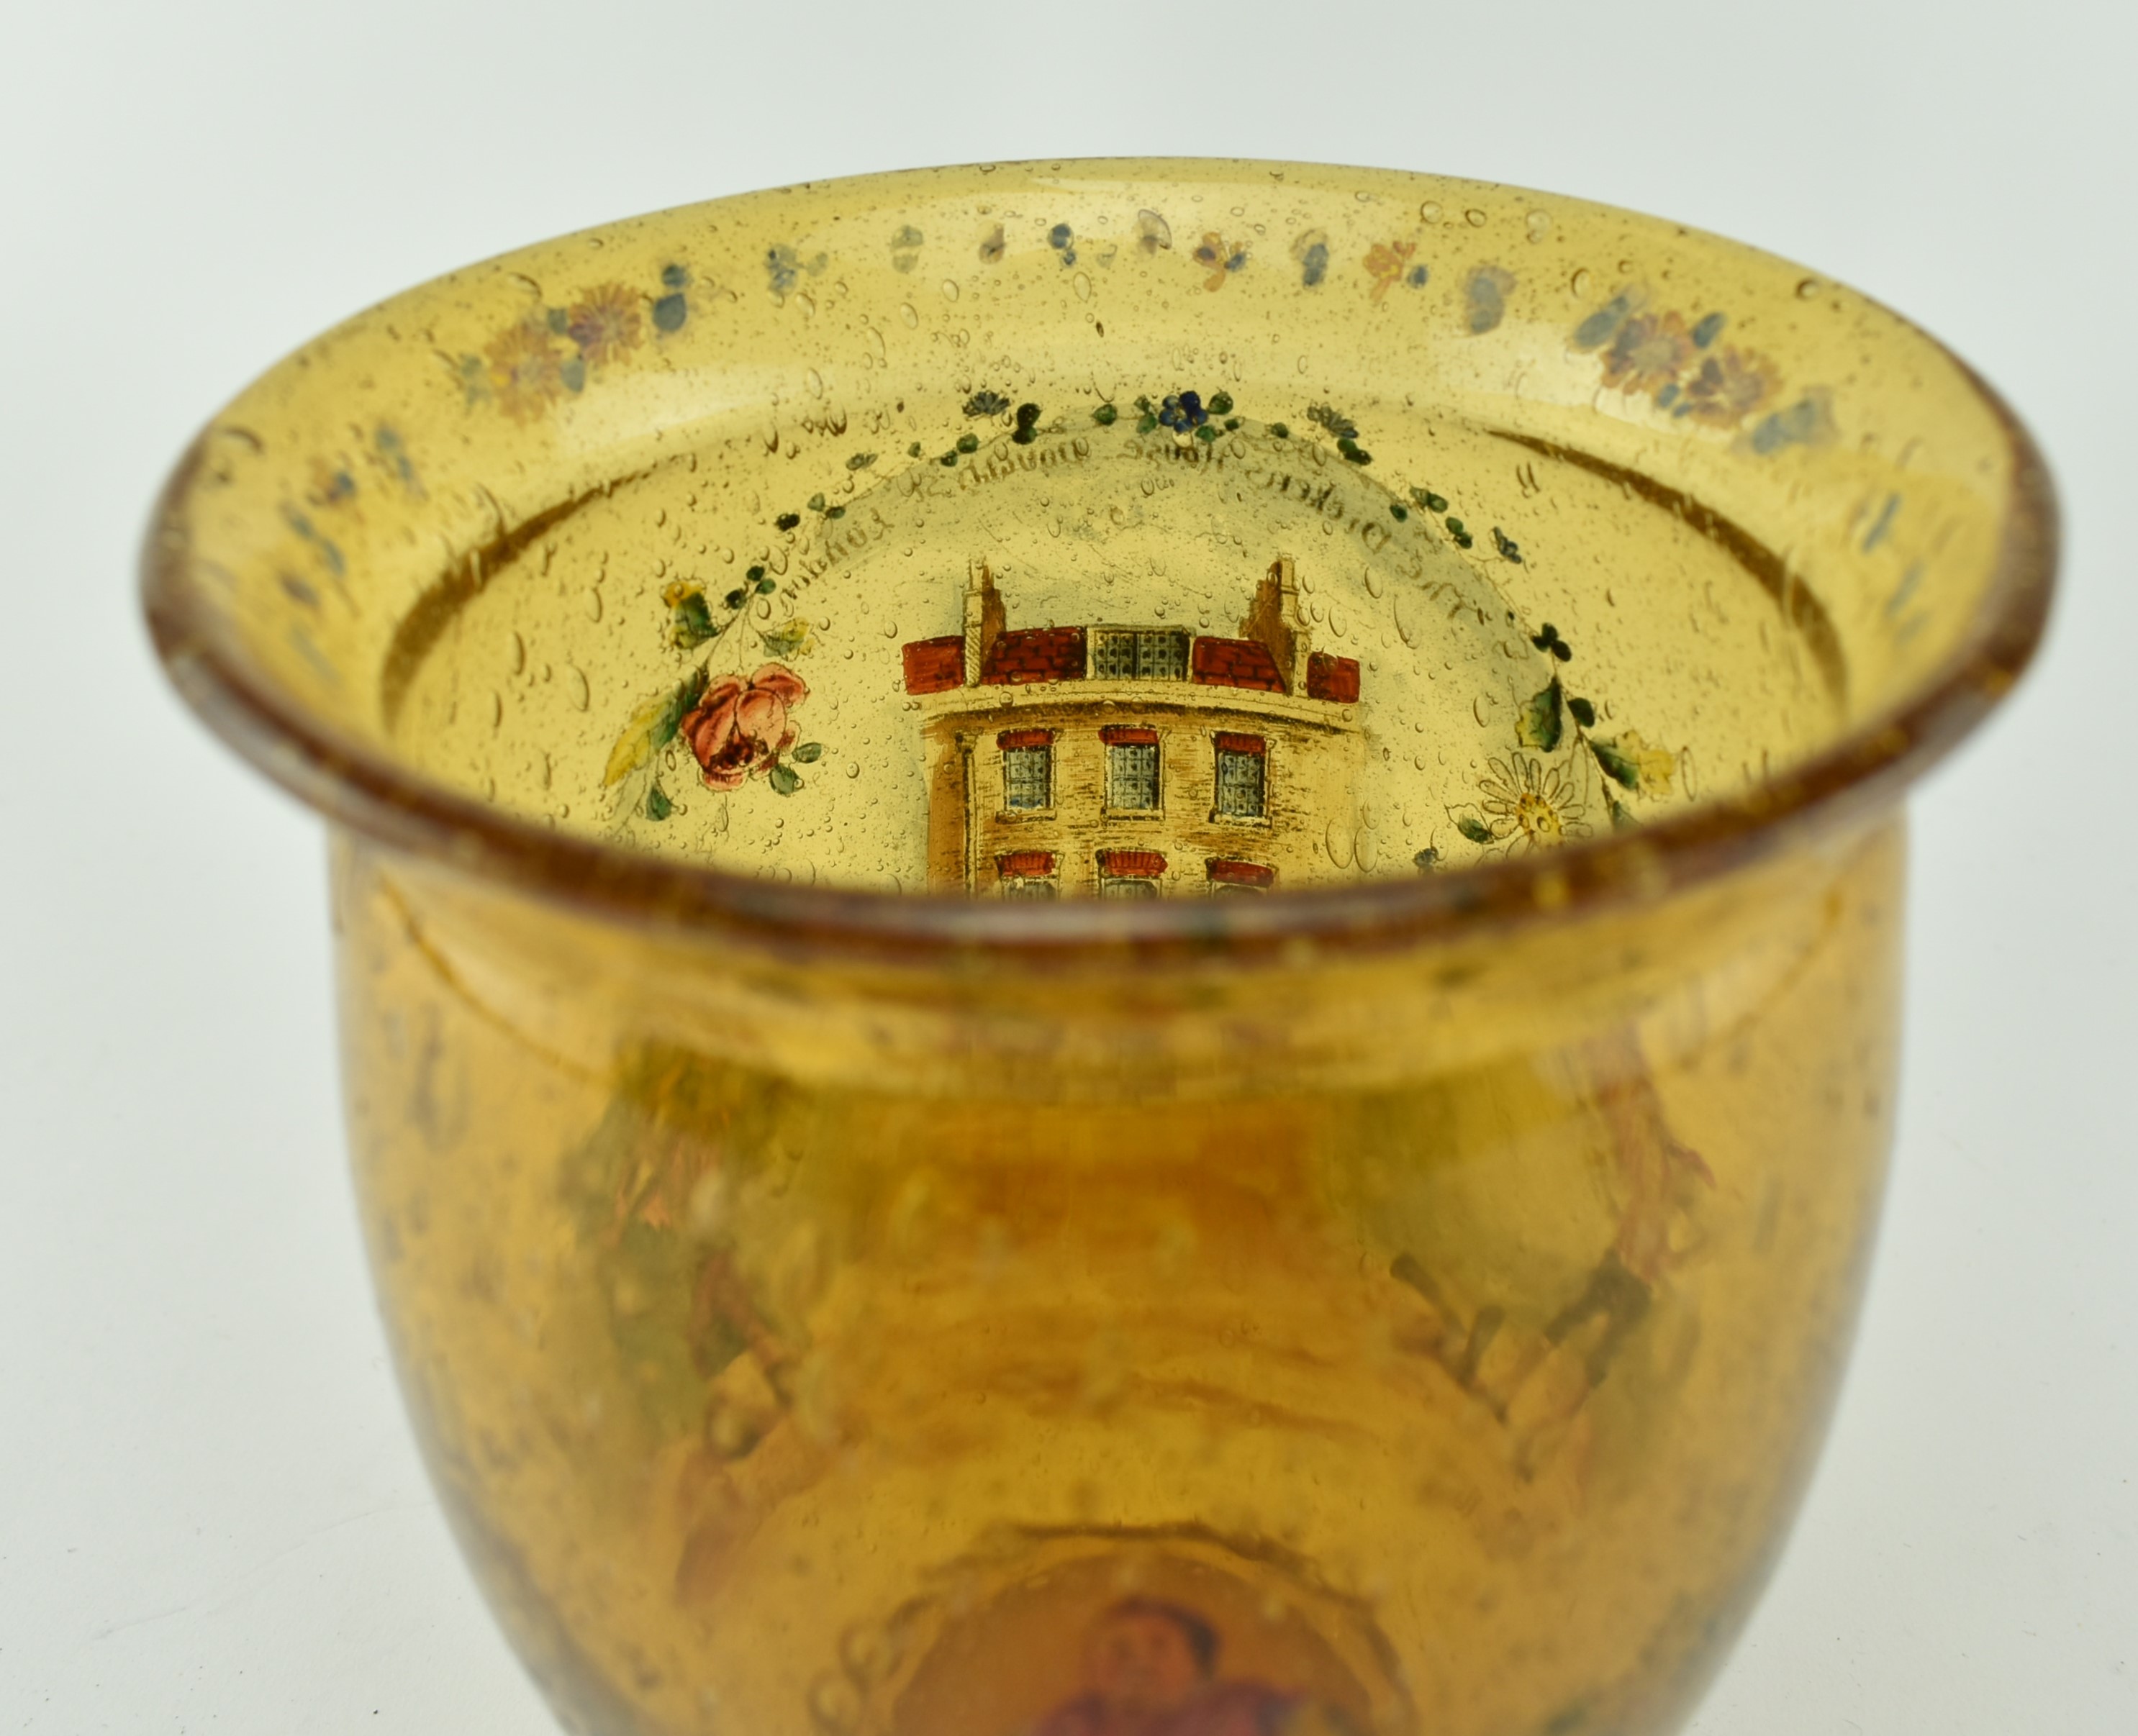 LATE 19TH CENTURY AMBER GLASS VASE WITH DICKENS SCENES - Image 3 of 5